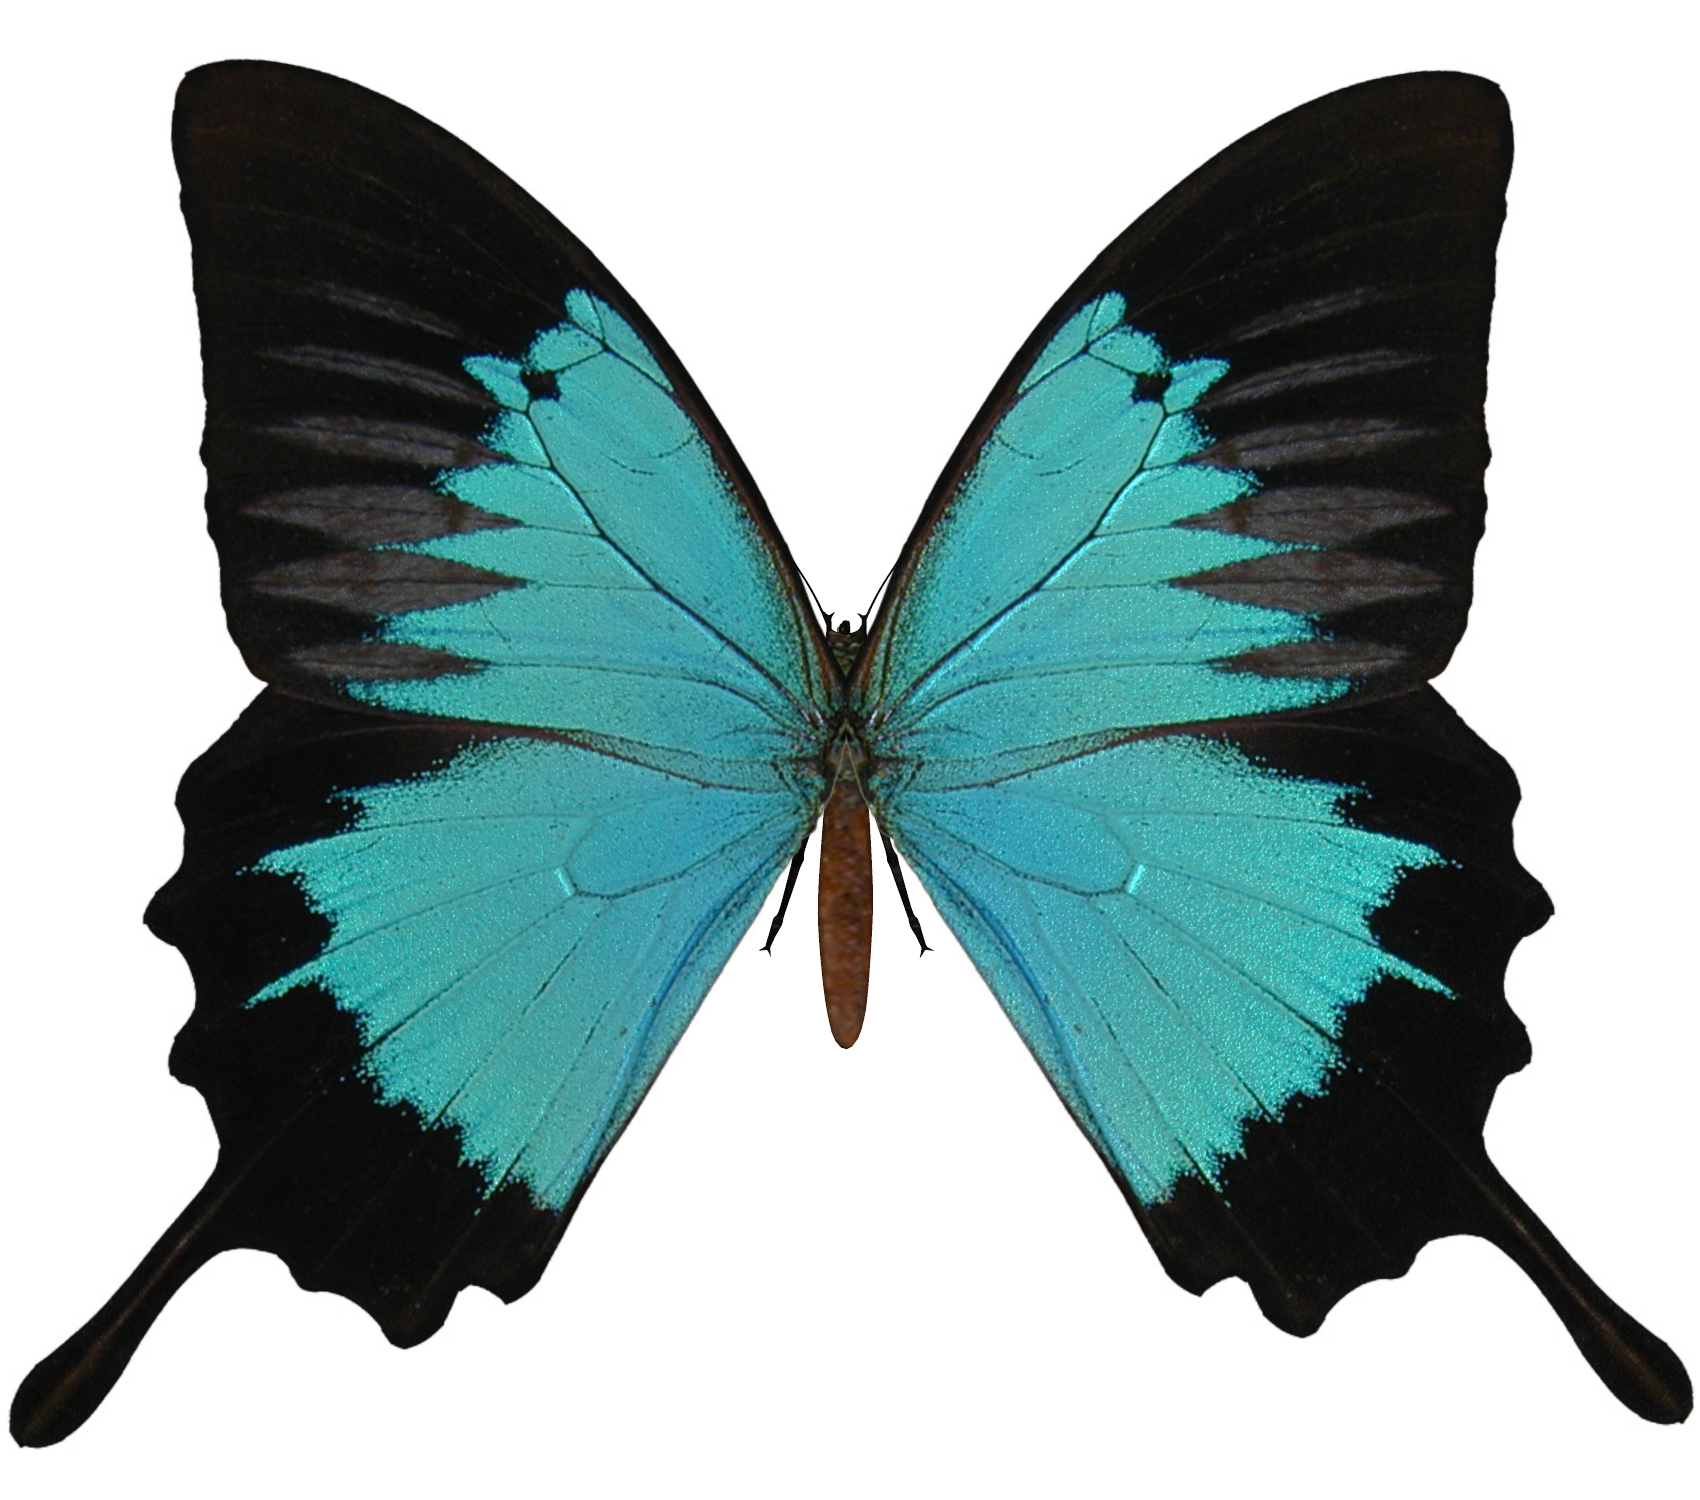 Butterfly Free Download Image PNG Image